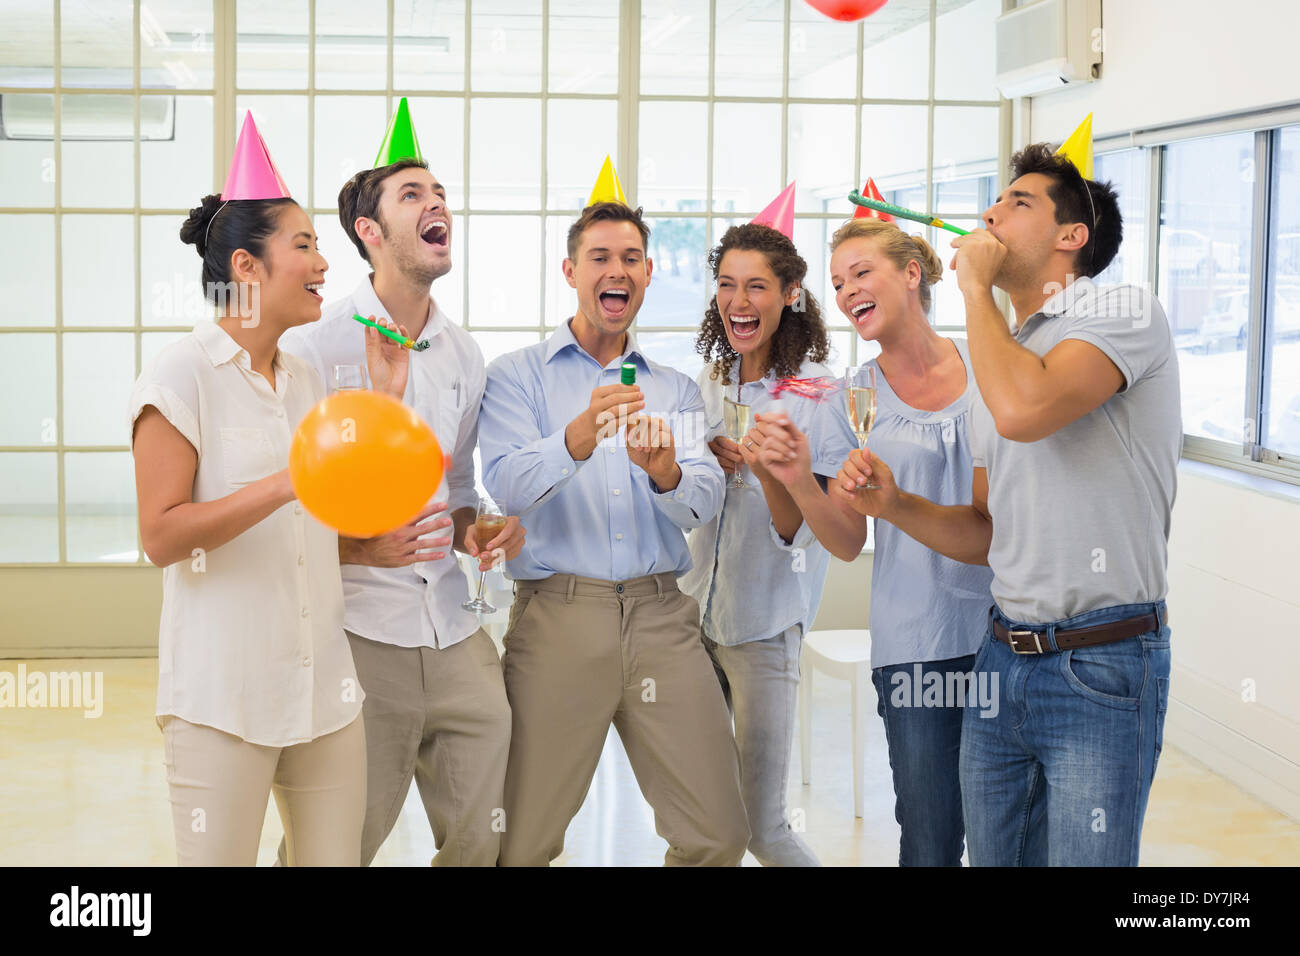 Casual business team celebrating with champagne and party poppers Stock Photo